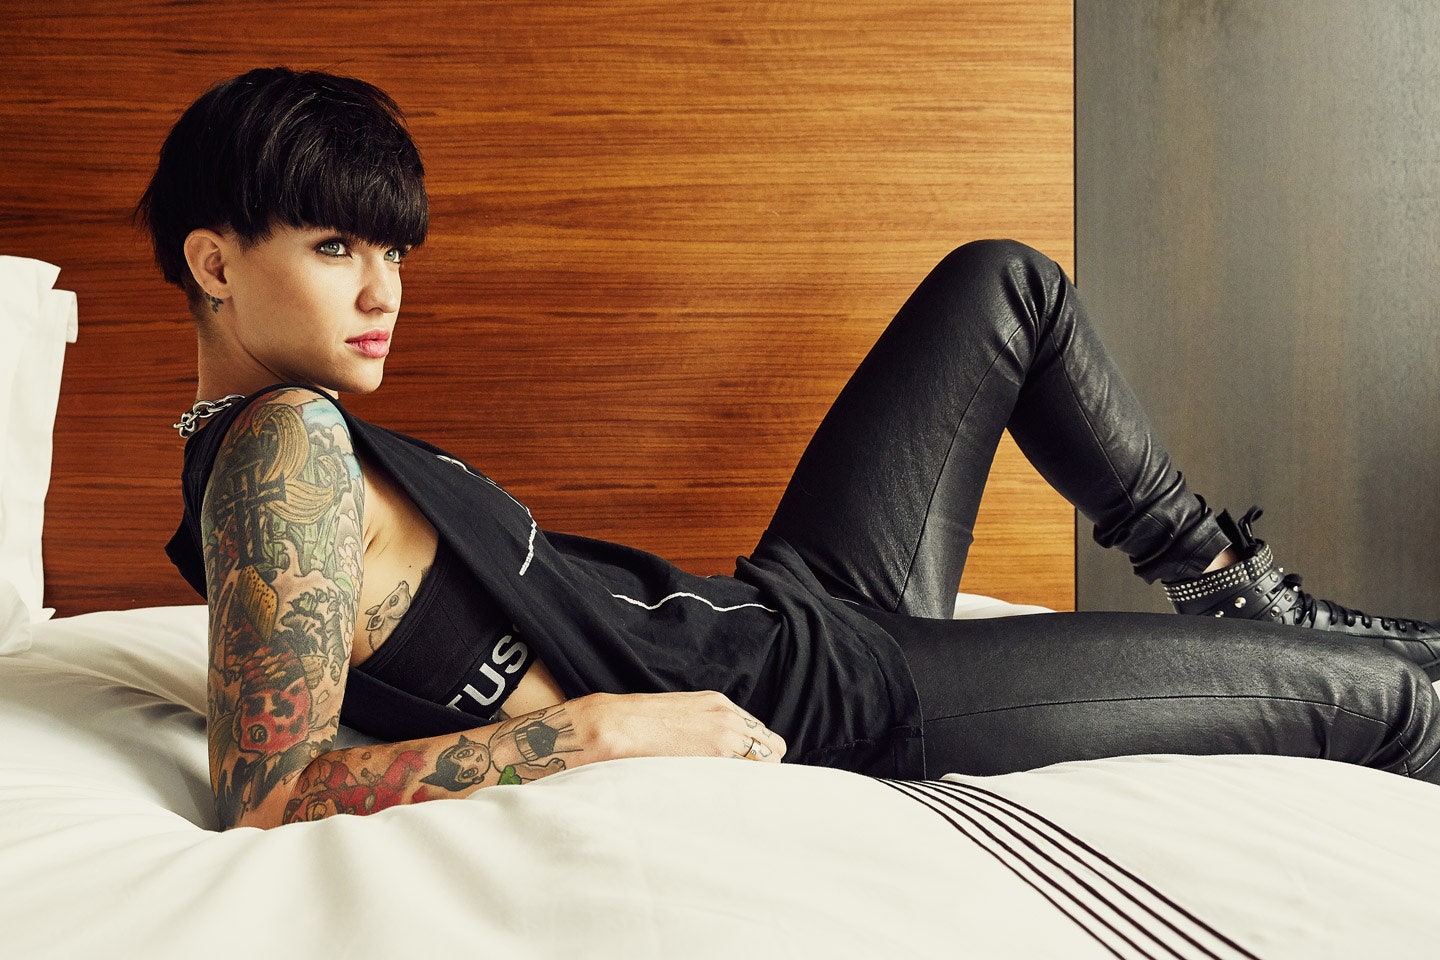 brad c recommends ruby rose hot pics pic